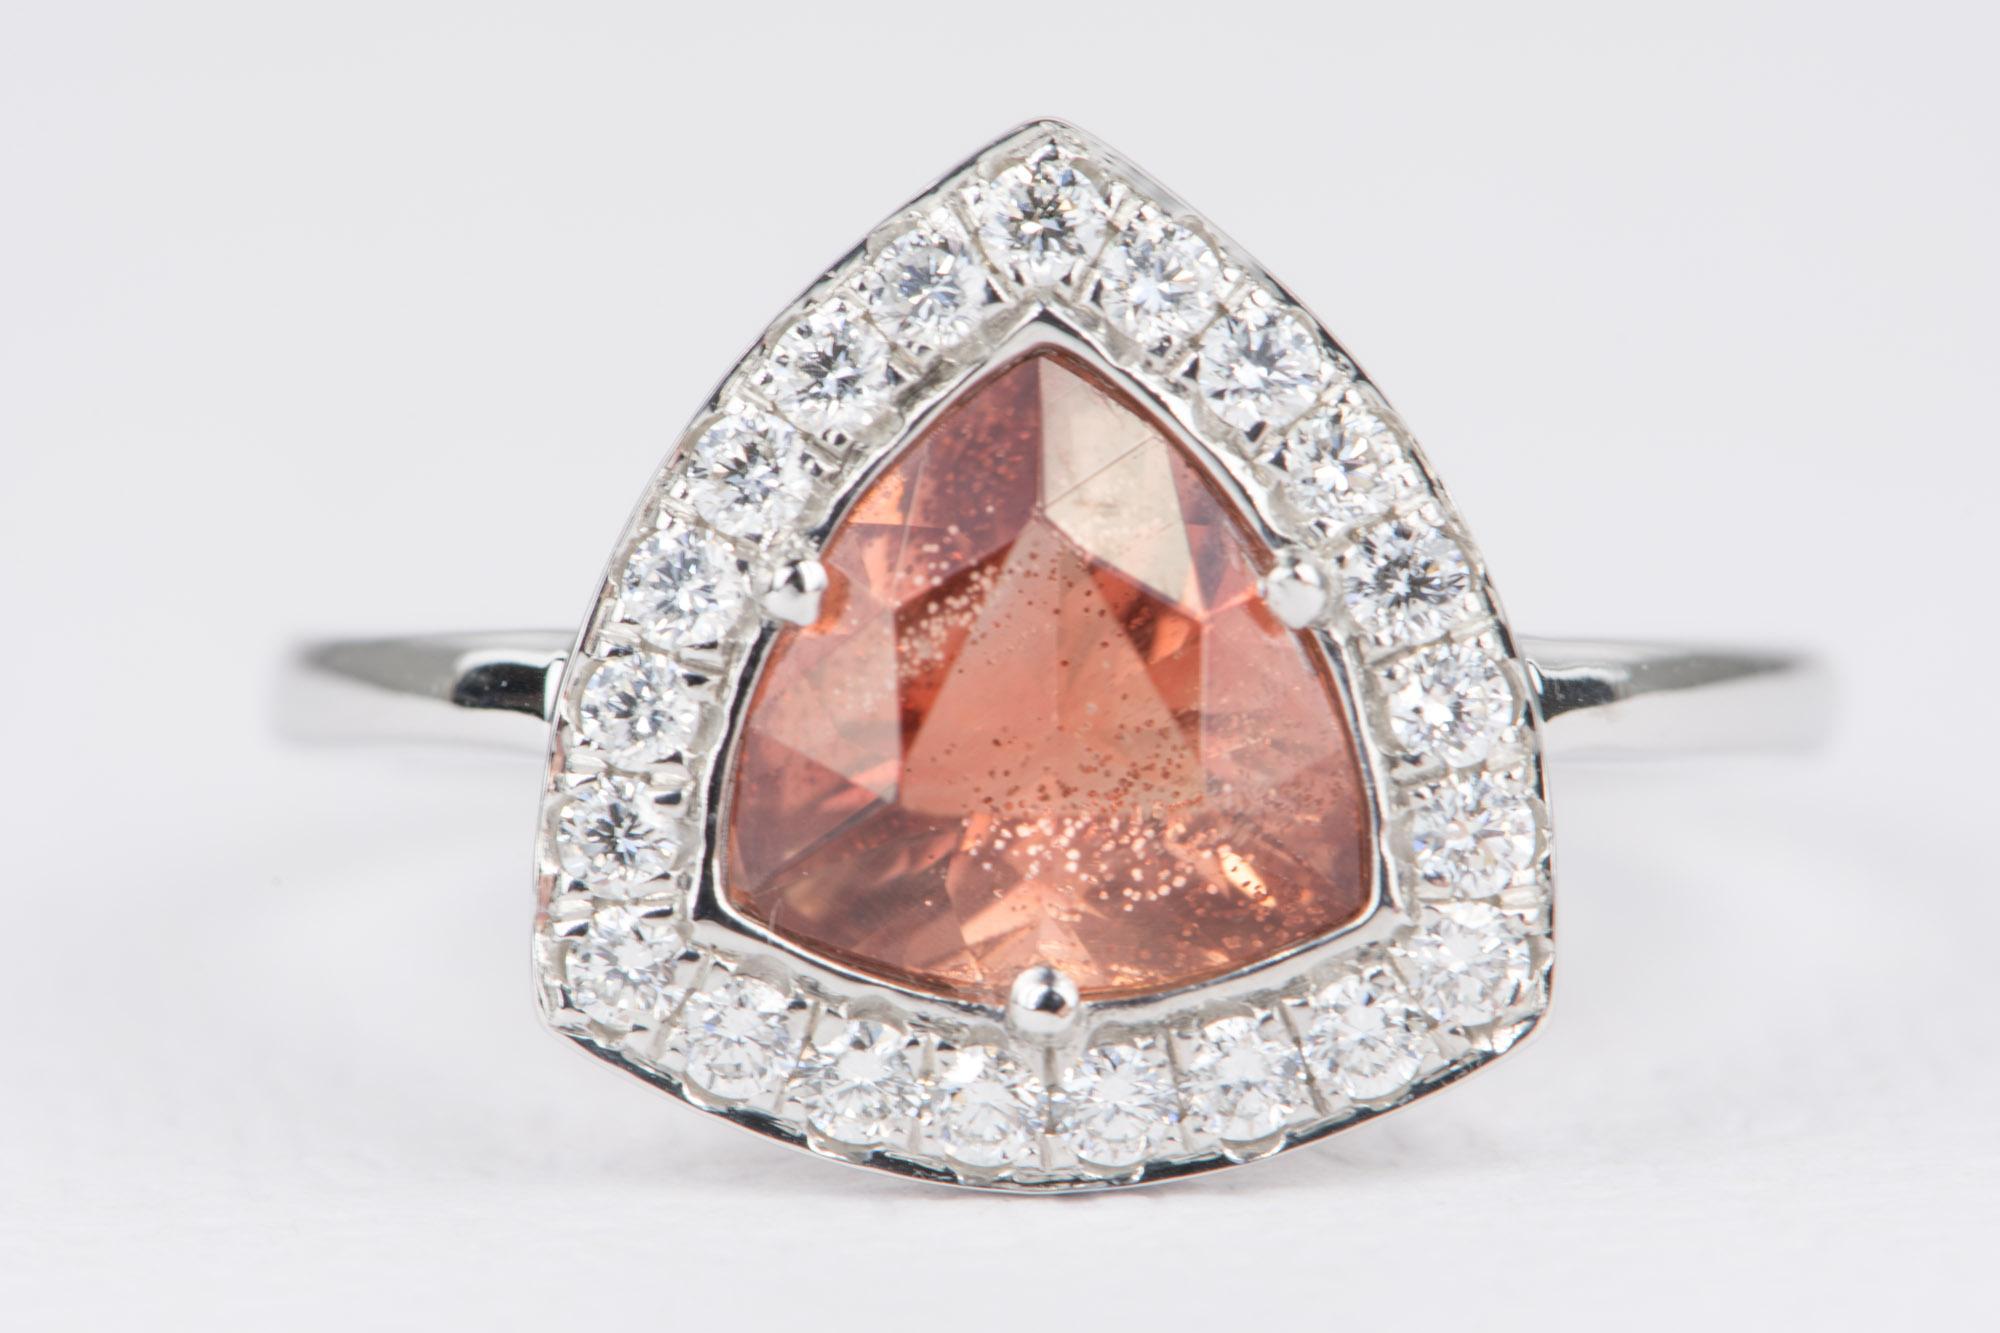 ♥  Solid 14K gold ring set with a trillion shape Oregon sunstone, surrounded by a halo of natural white diamonds, adding to the sparkle factor!
 ♥  The beautiful sunstone has really beautiful schillers inside! They contrast really nicely with the